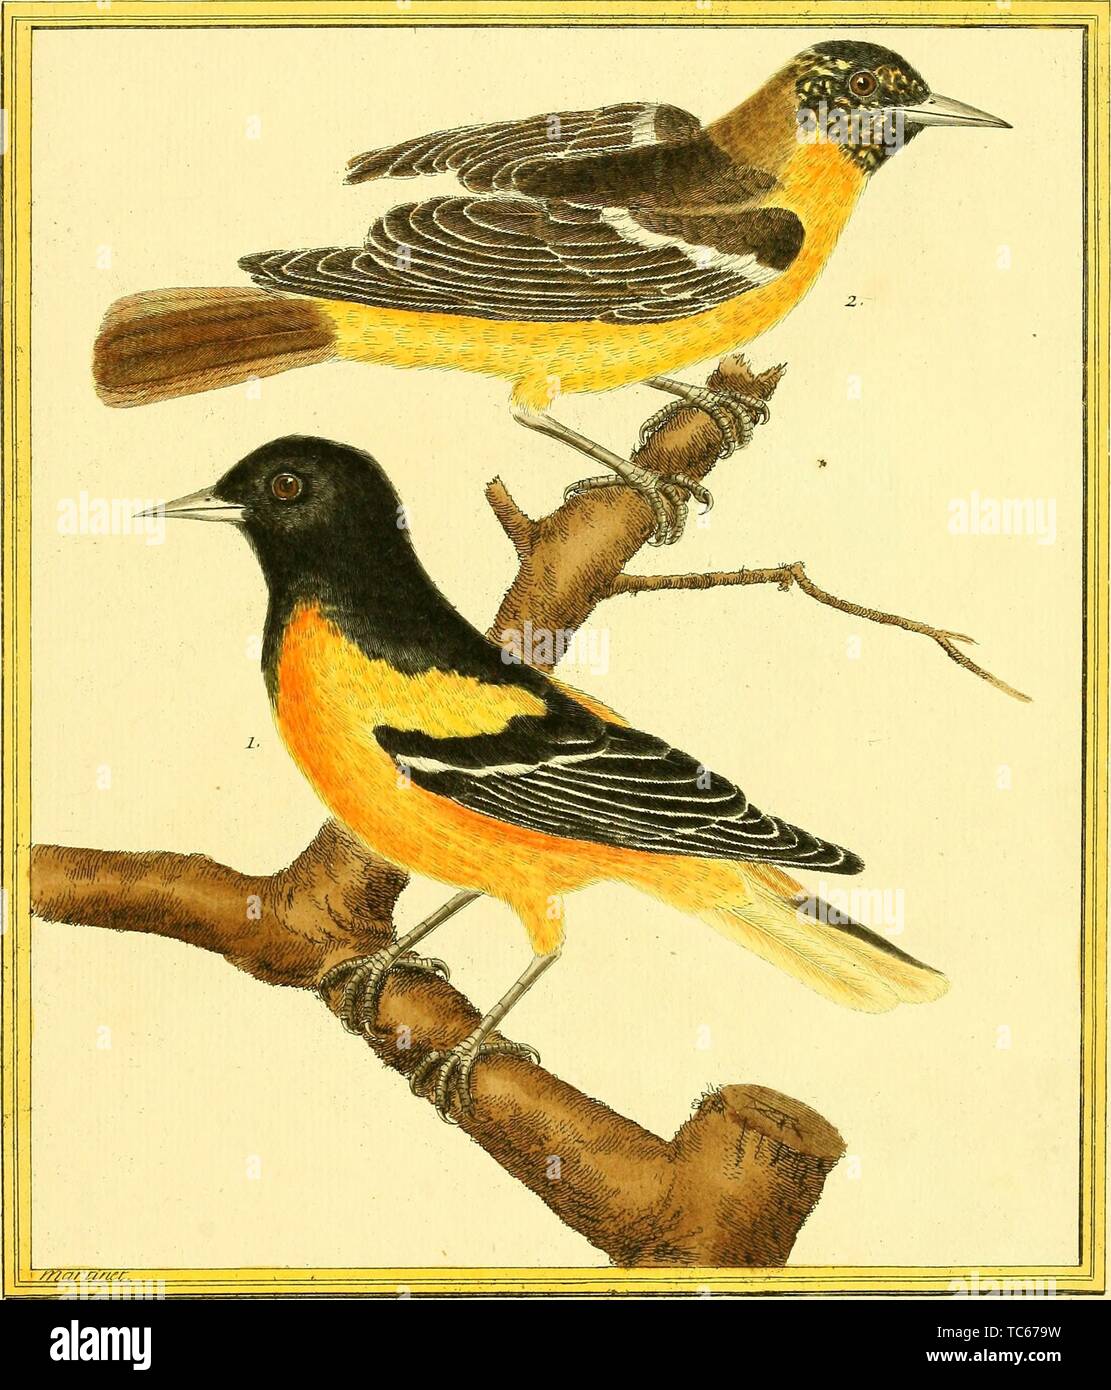 Engraved drawings of the Baltimore Oriole (Icterus galbula) and Crossbred Baltimore Oriole, Icterus galbula, from the book 'Planches enluminees Dhistoire naturelle' by Francois Nicolas, Louis Jean Marie Daubenton, and Edme-Louis Daubenton, 1765. Courtesy Internet Archive. () Stock Photo